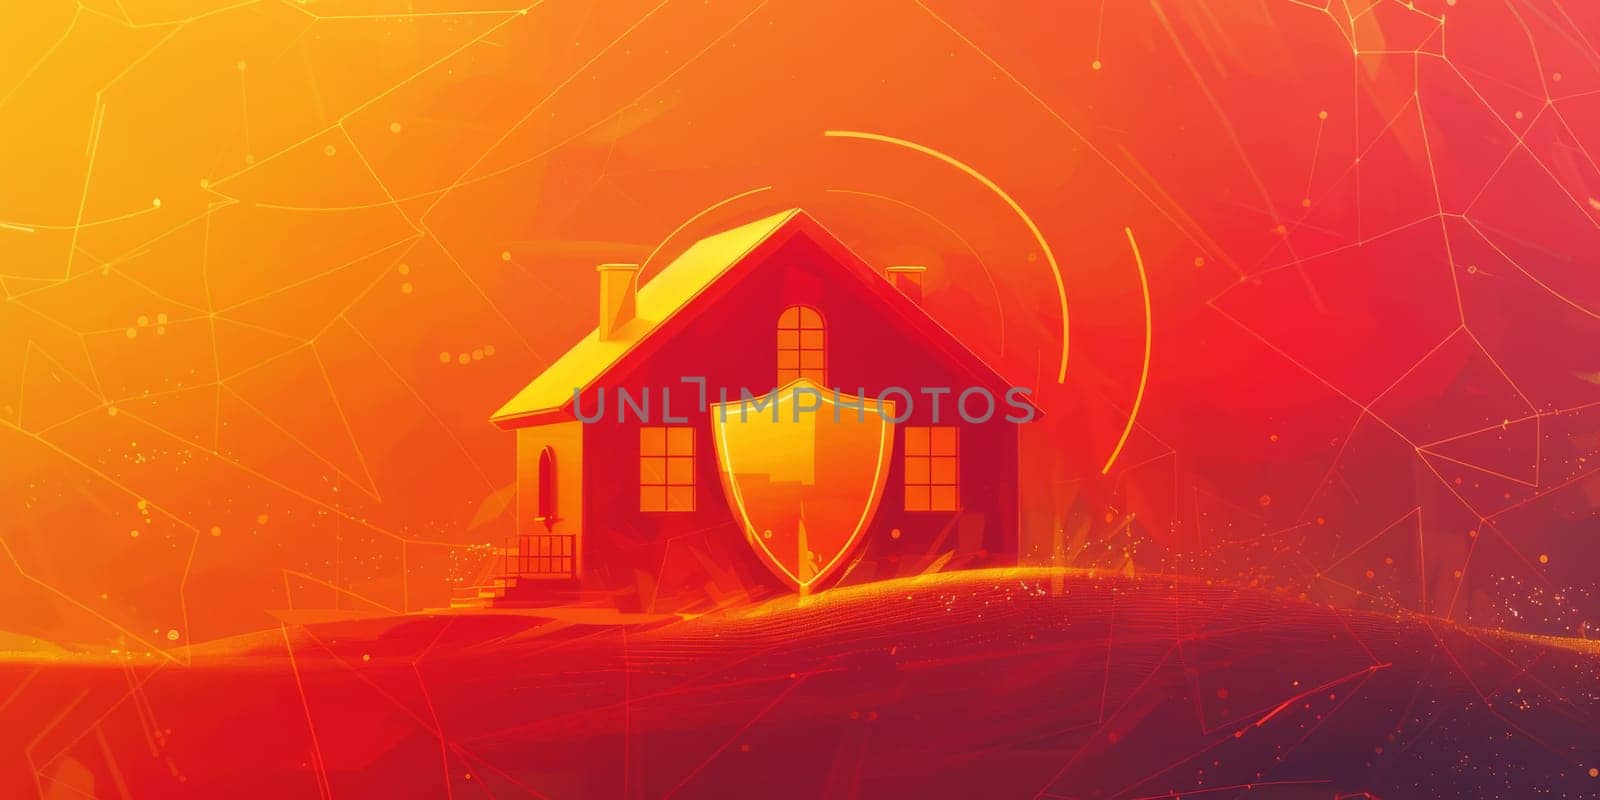 Protect house concept, protection shield in front of the house isolated on orange and red background